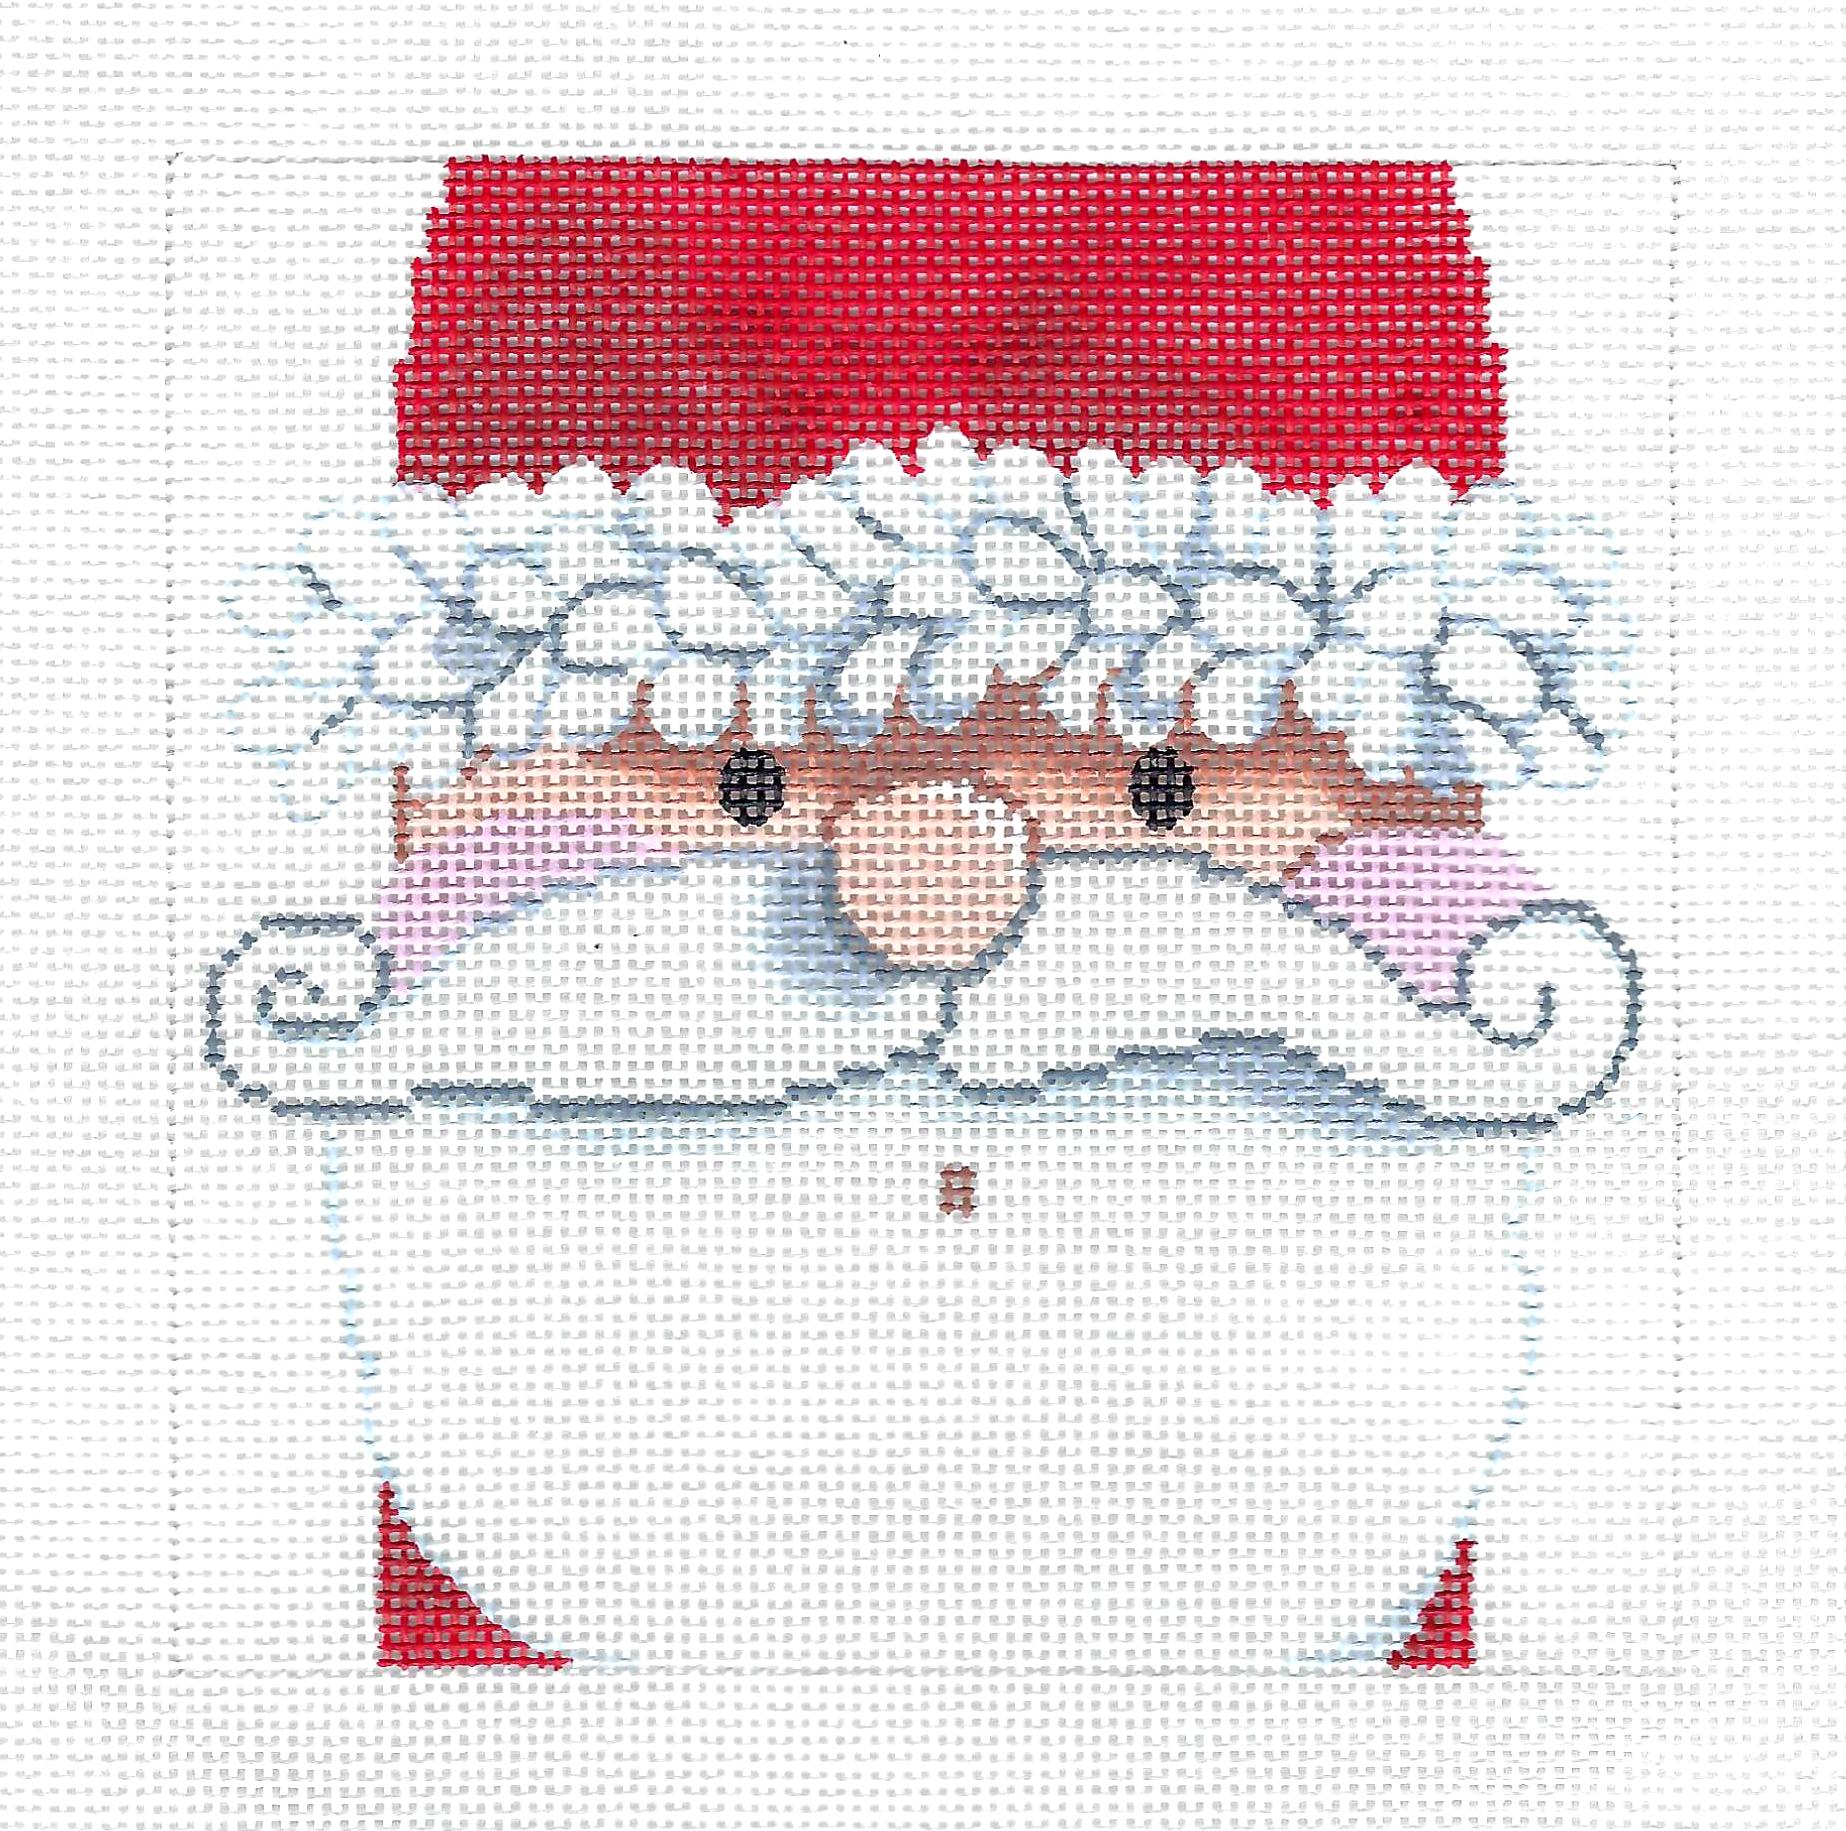 Christmas ~ Many Faces of Santa #51 handpainted 5X 5 on 18 Mesh  Needlepoint Canvas by LEE Needle Art